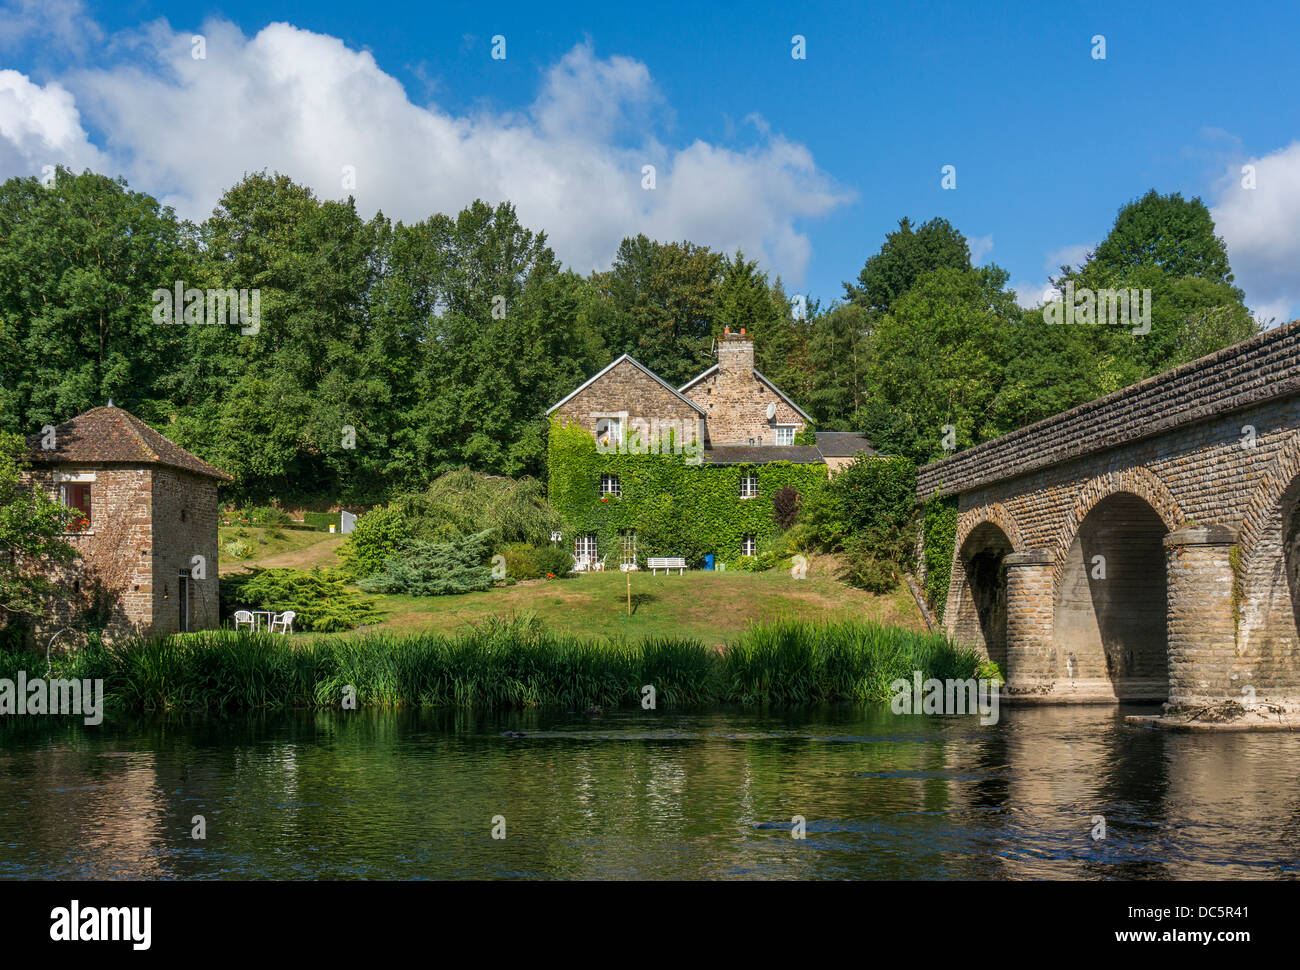 Chambre d'hotes, gite and bridge over the river at Le Vey, near Clécy, Calvados department, Basse-Normandie, north west France. Stock Photo